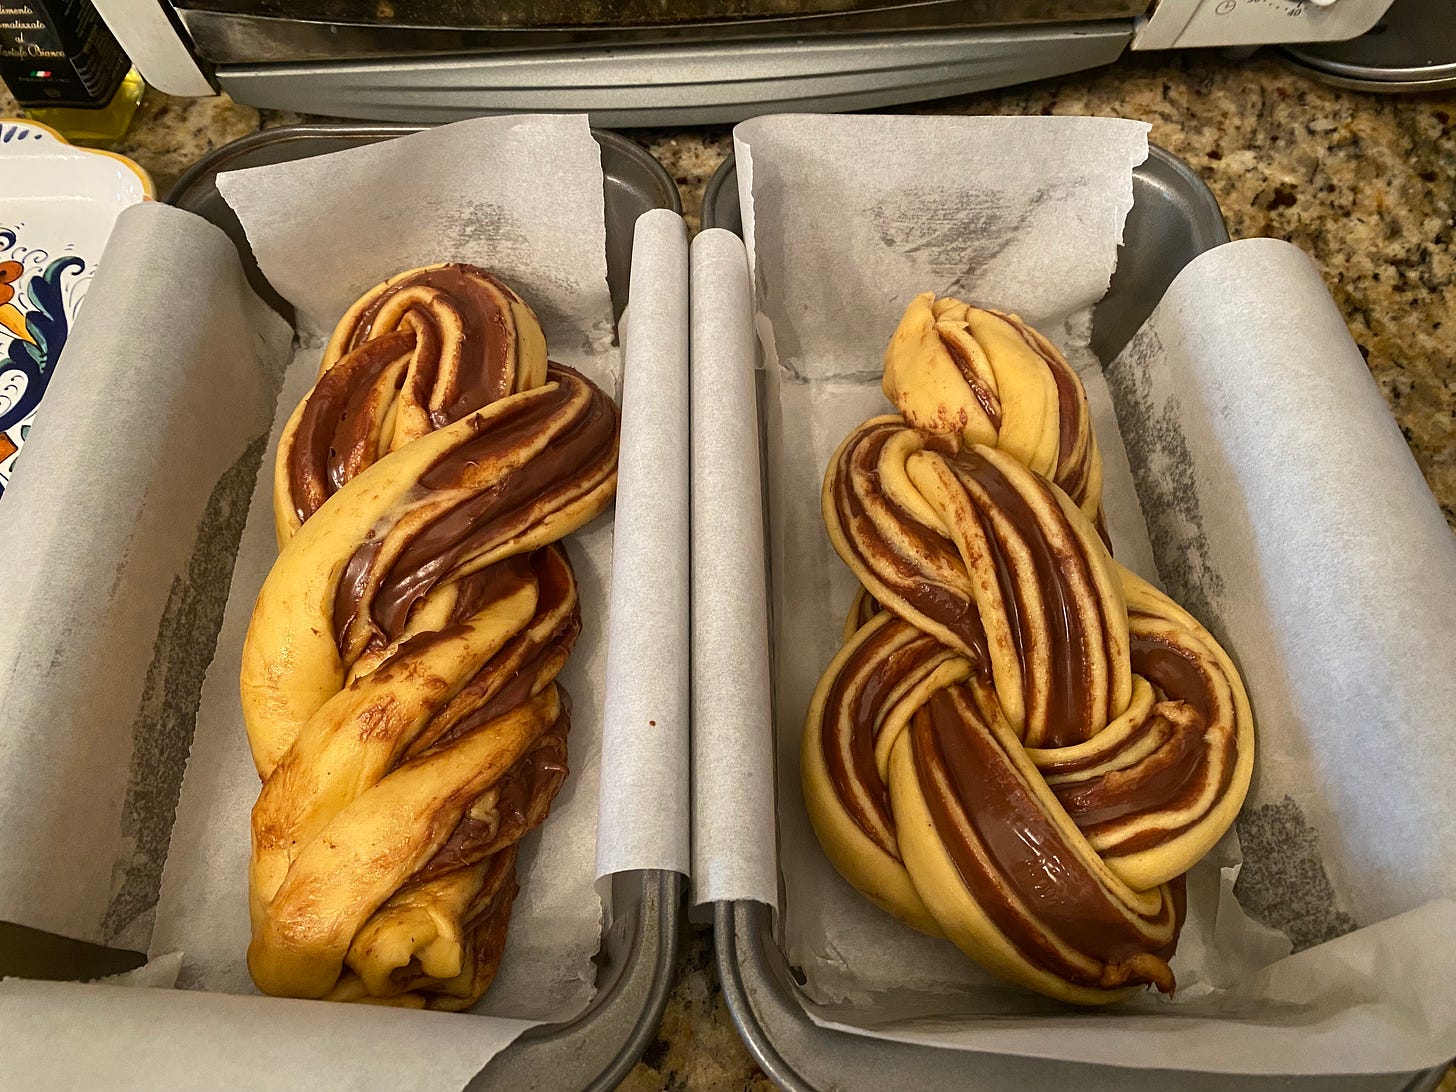 Two loaf pans lined with parchment, each with a stripey braid of unbaked dough inside. The one on the right is a little less messy-looking.